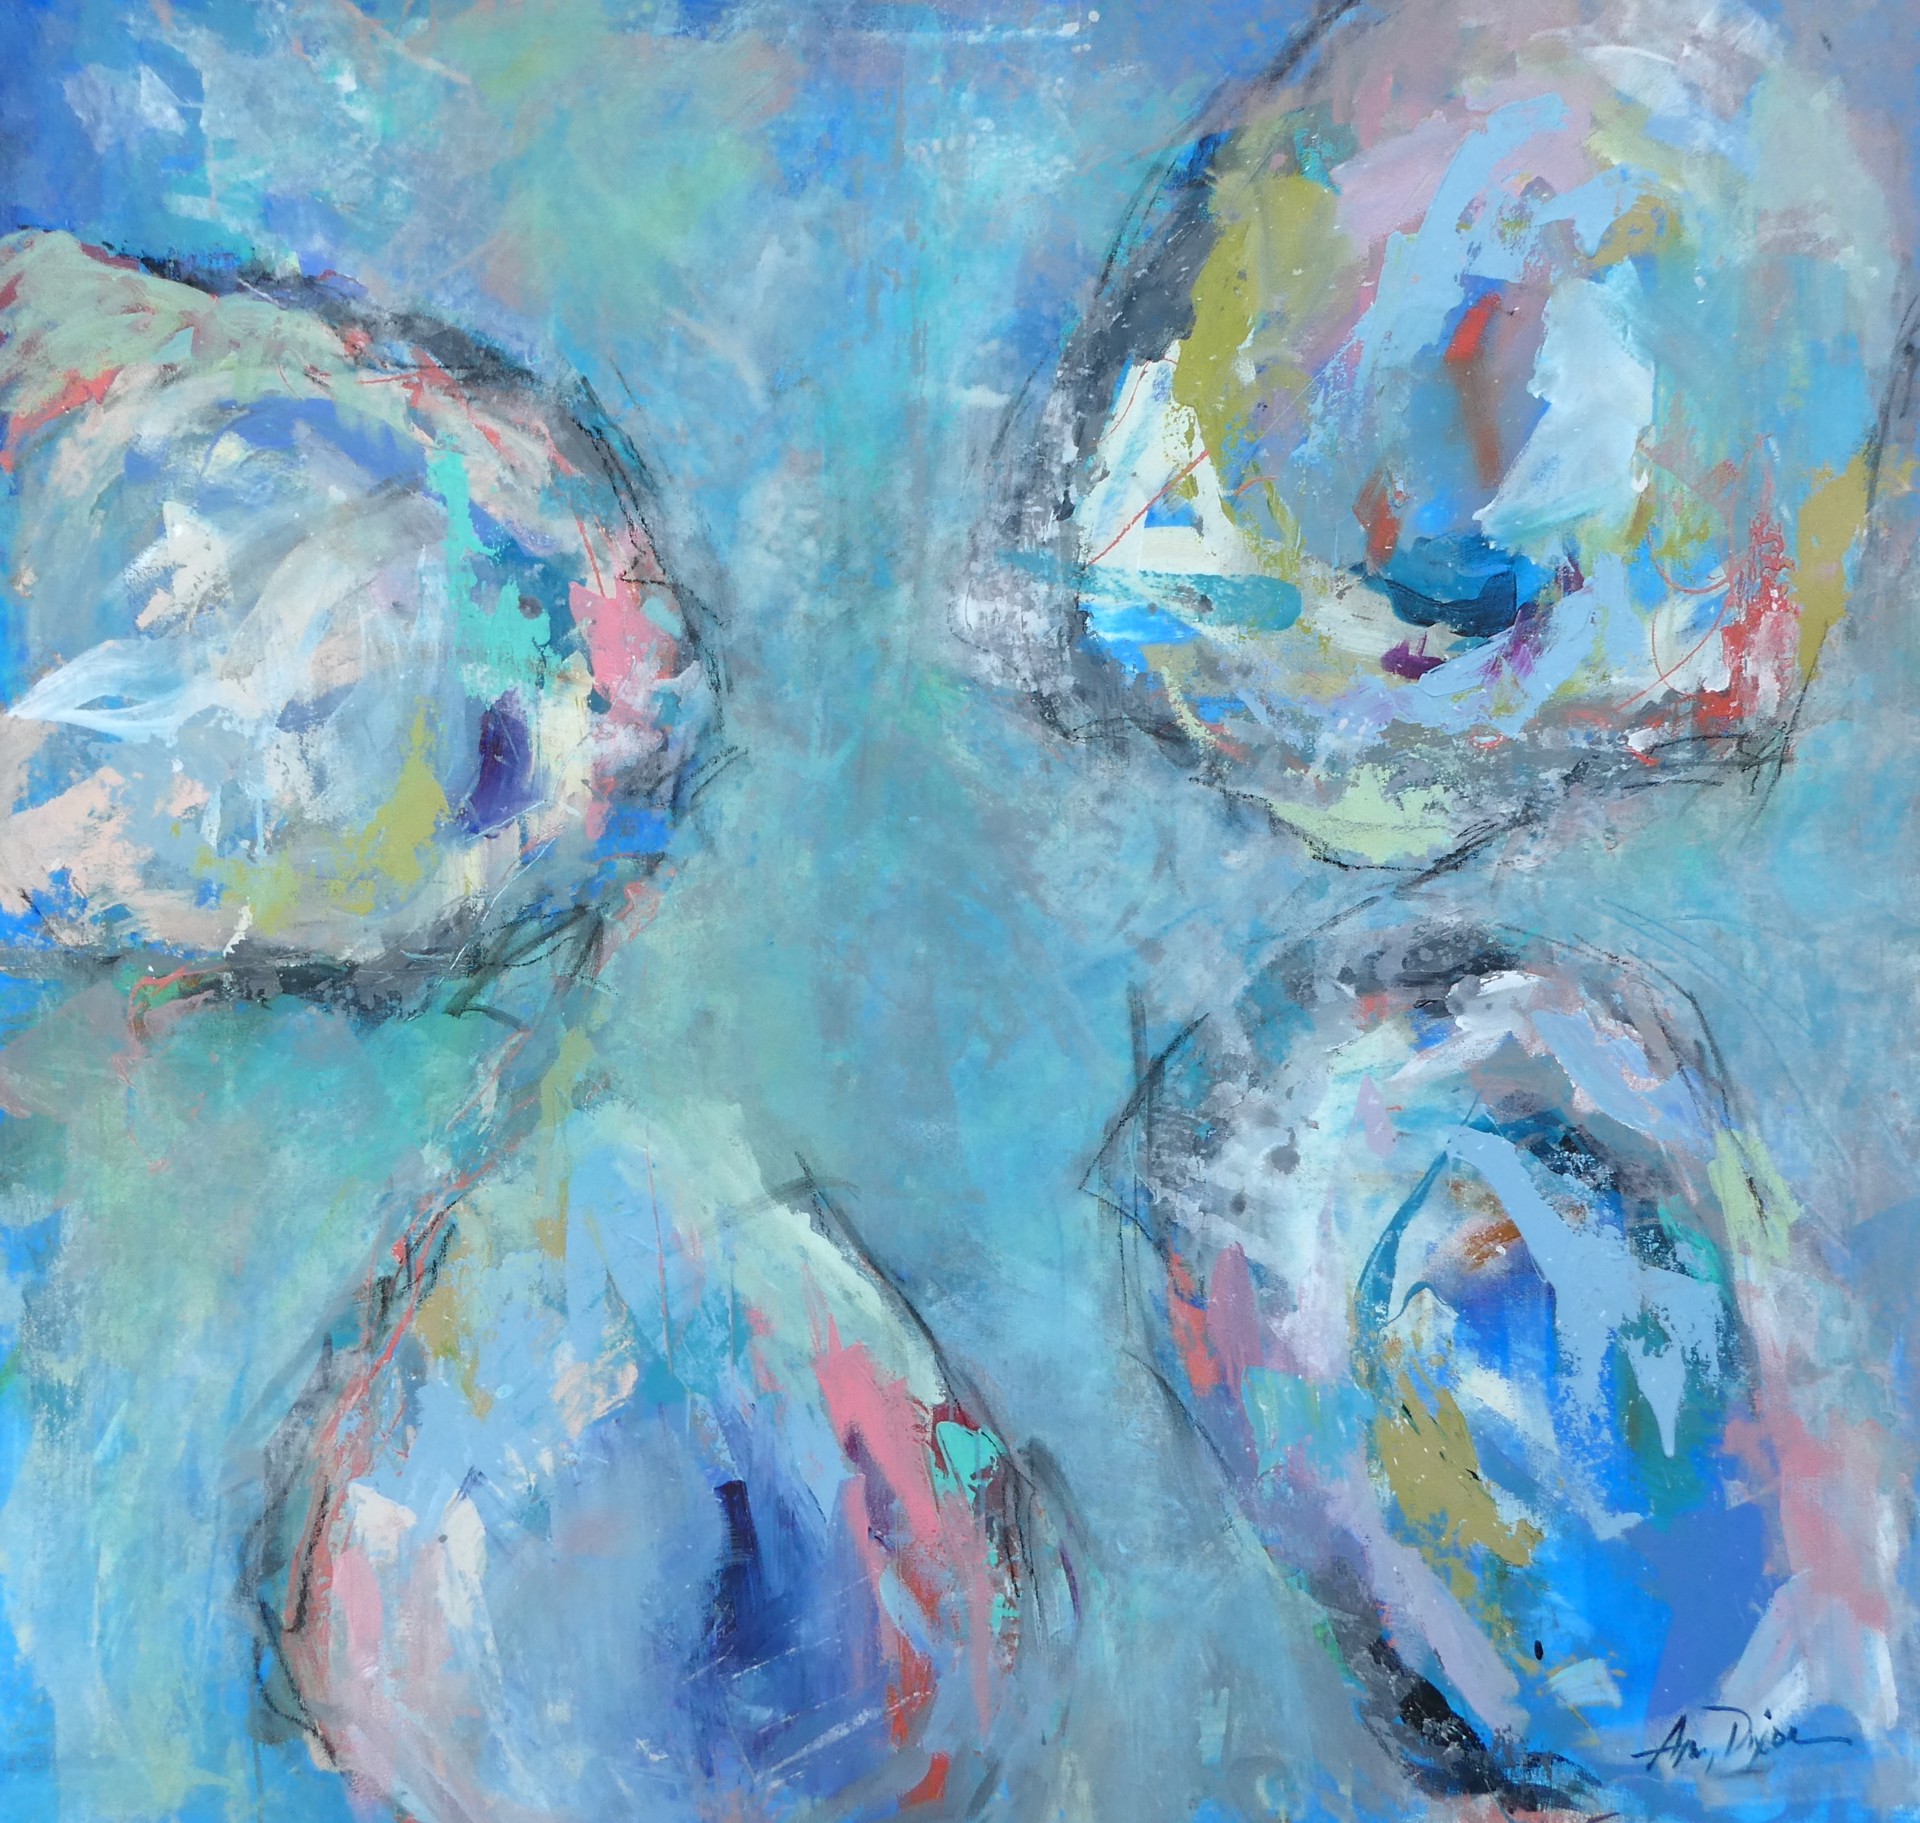 "Oyster Bed" original mixed media painting by Amy Dixon